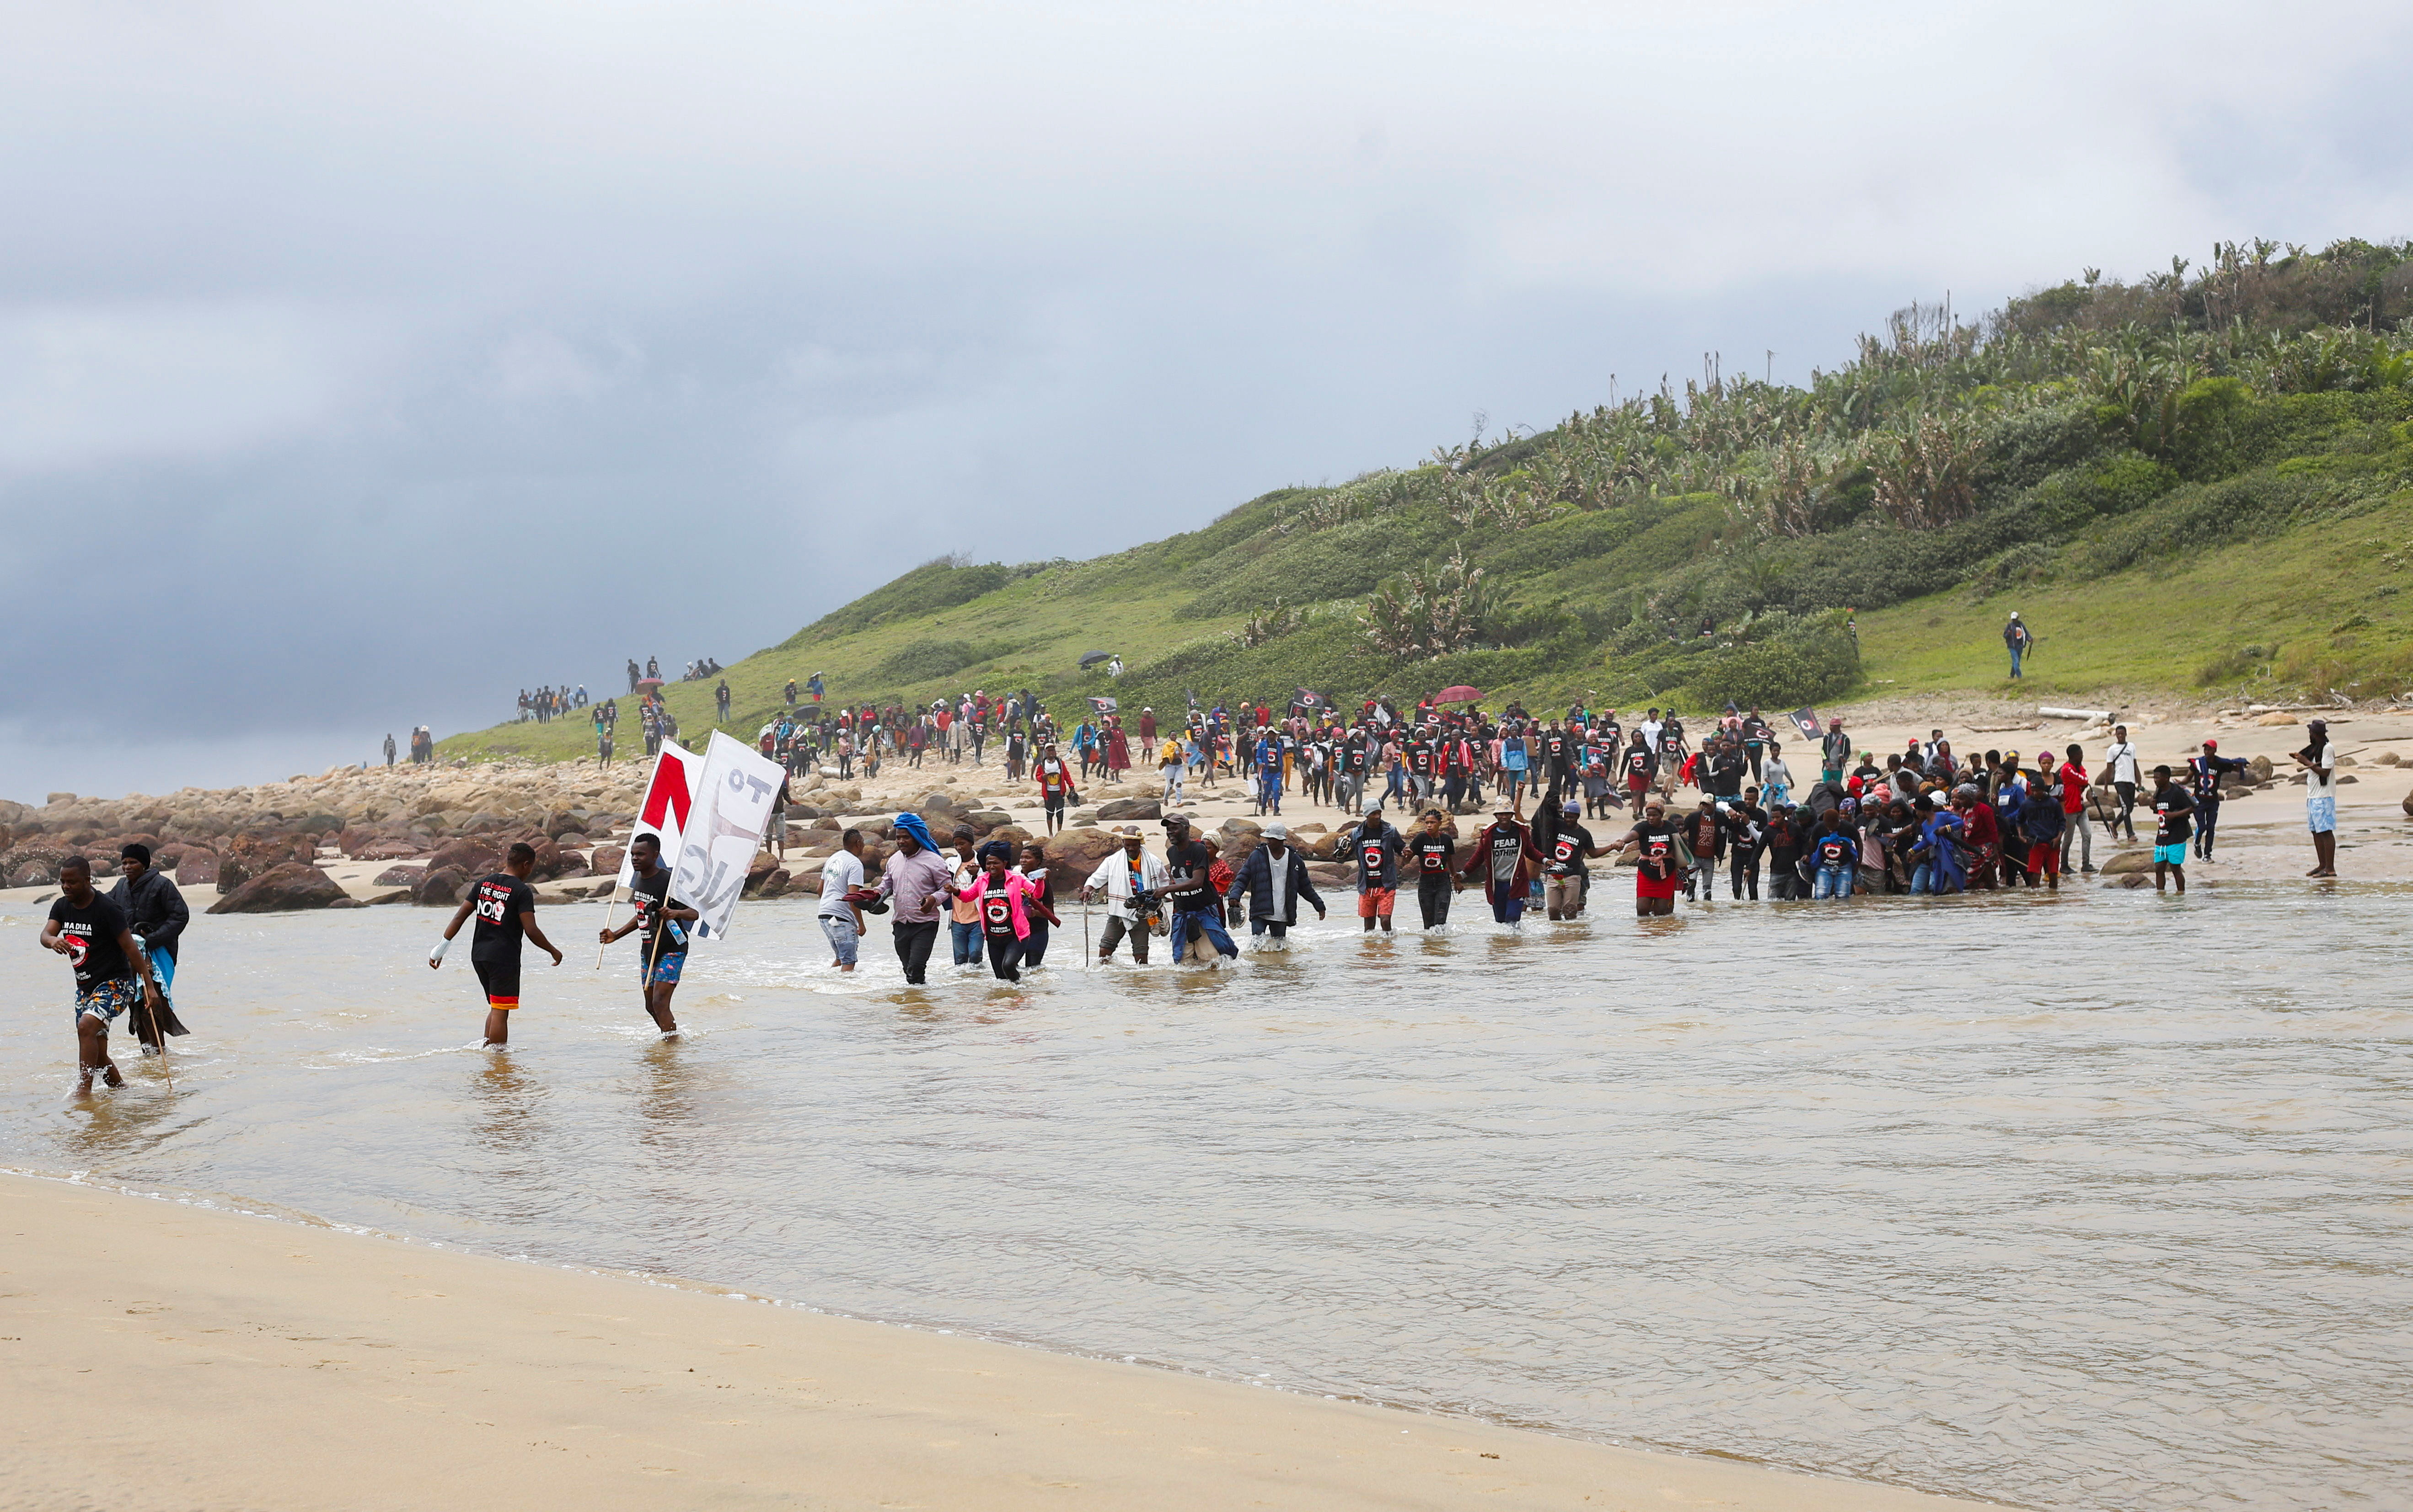 Wild Coast residents join a demonstration against Royal Dutch Shell's plans to start seismic surveys to explore petroleum systems off the country's popular Wild Coast at Mzamba Beach, Sigidi, South Africa, December 5, 2021. REUTERS/Rogan Ward